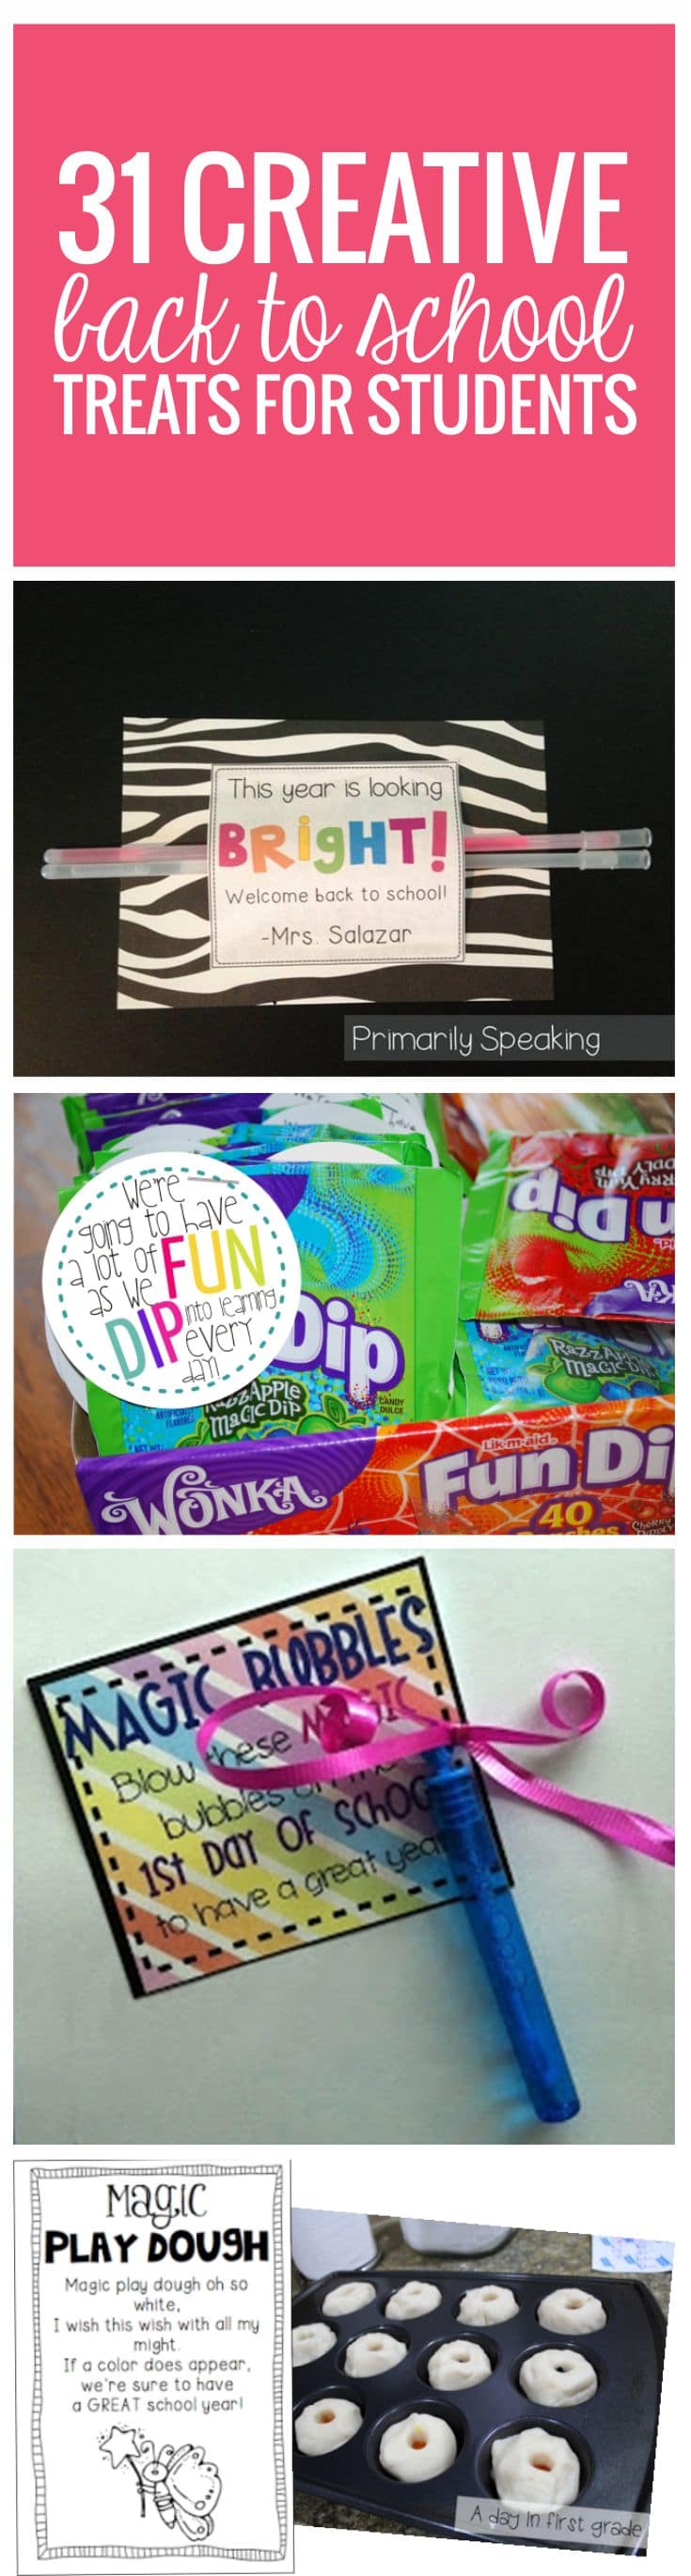 31 Creative Back to School Treats for Students - comes with free printables - love it